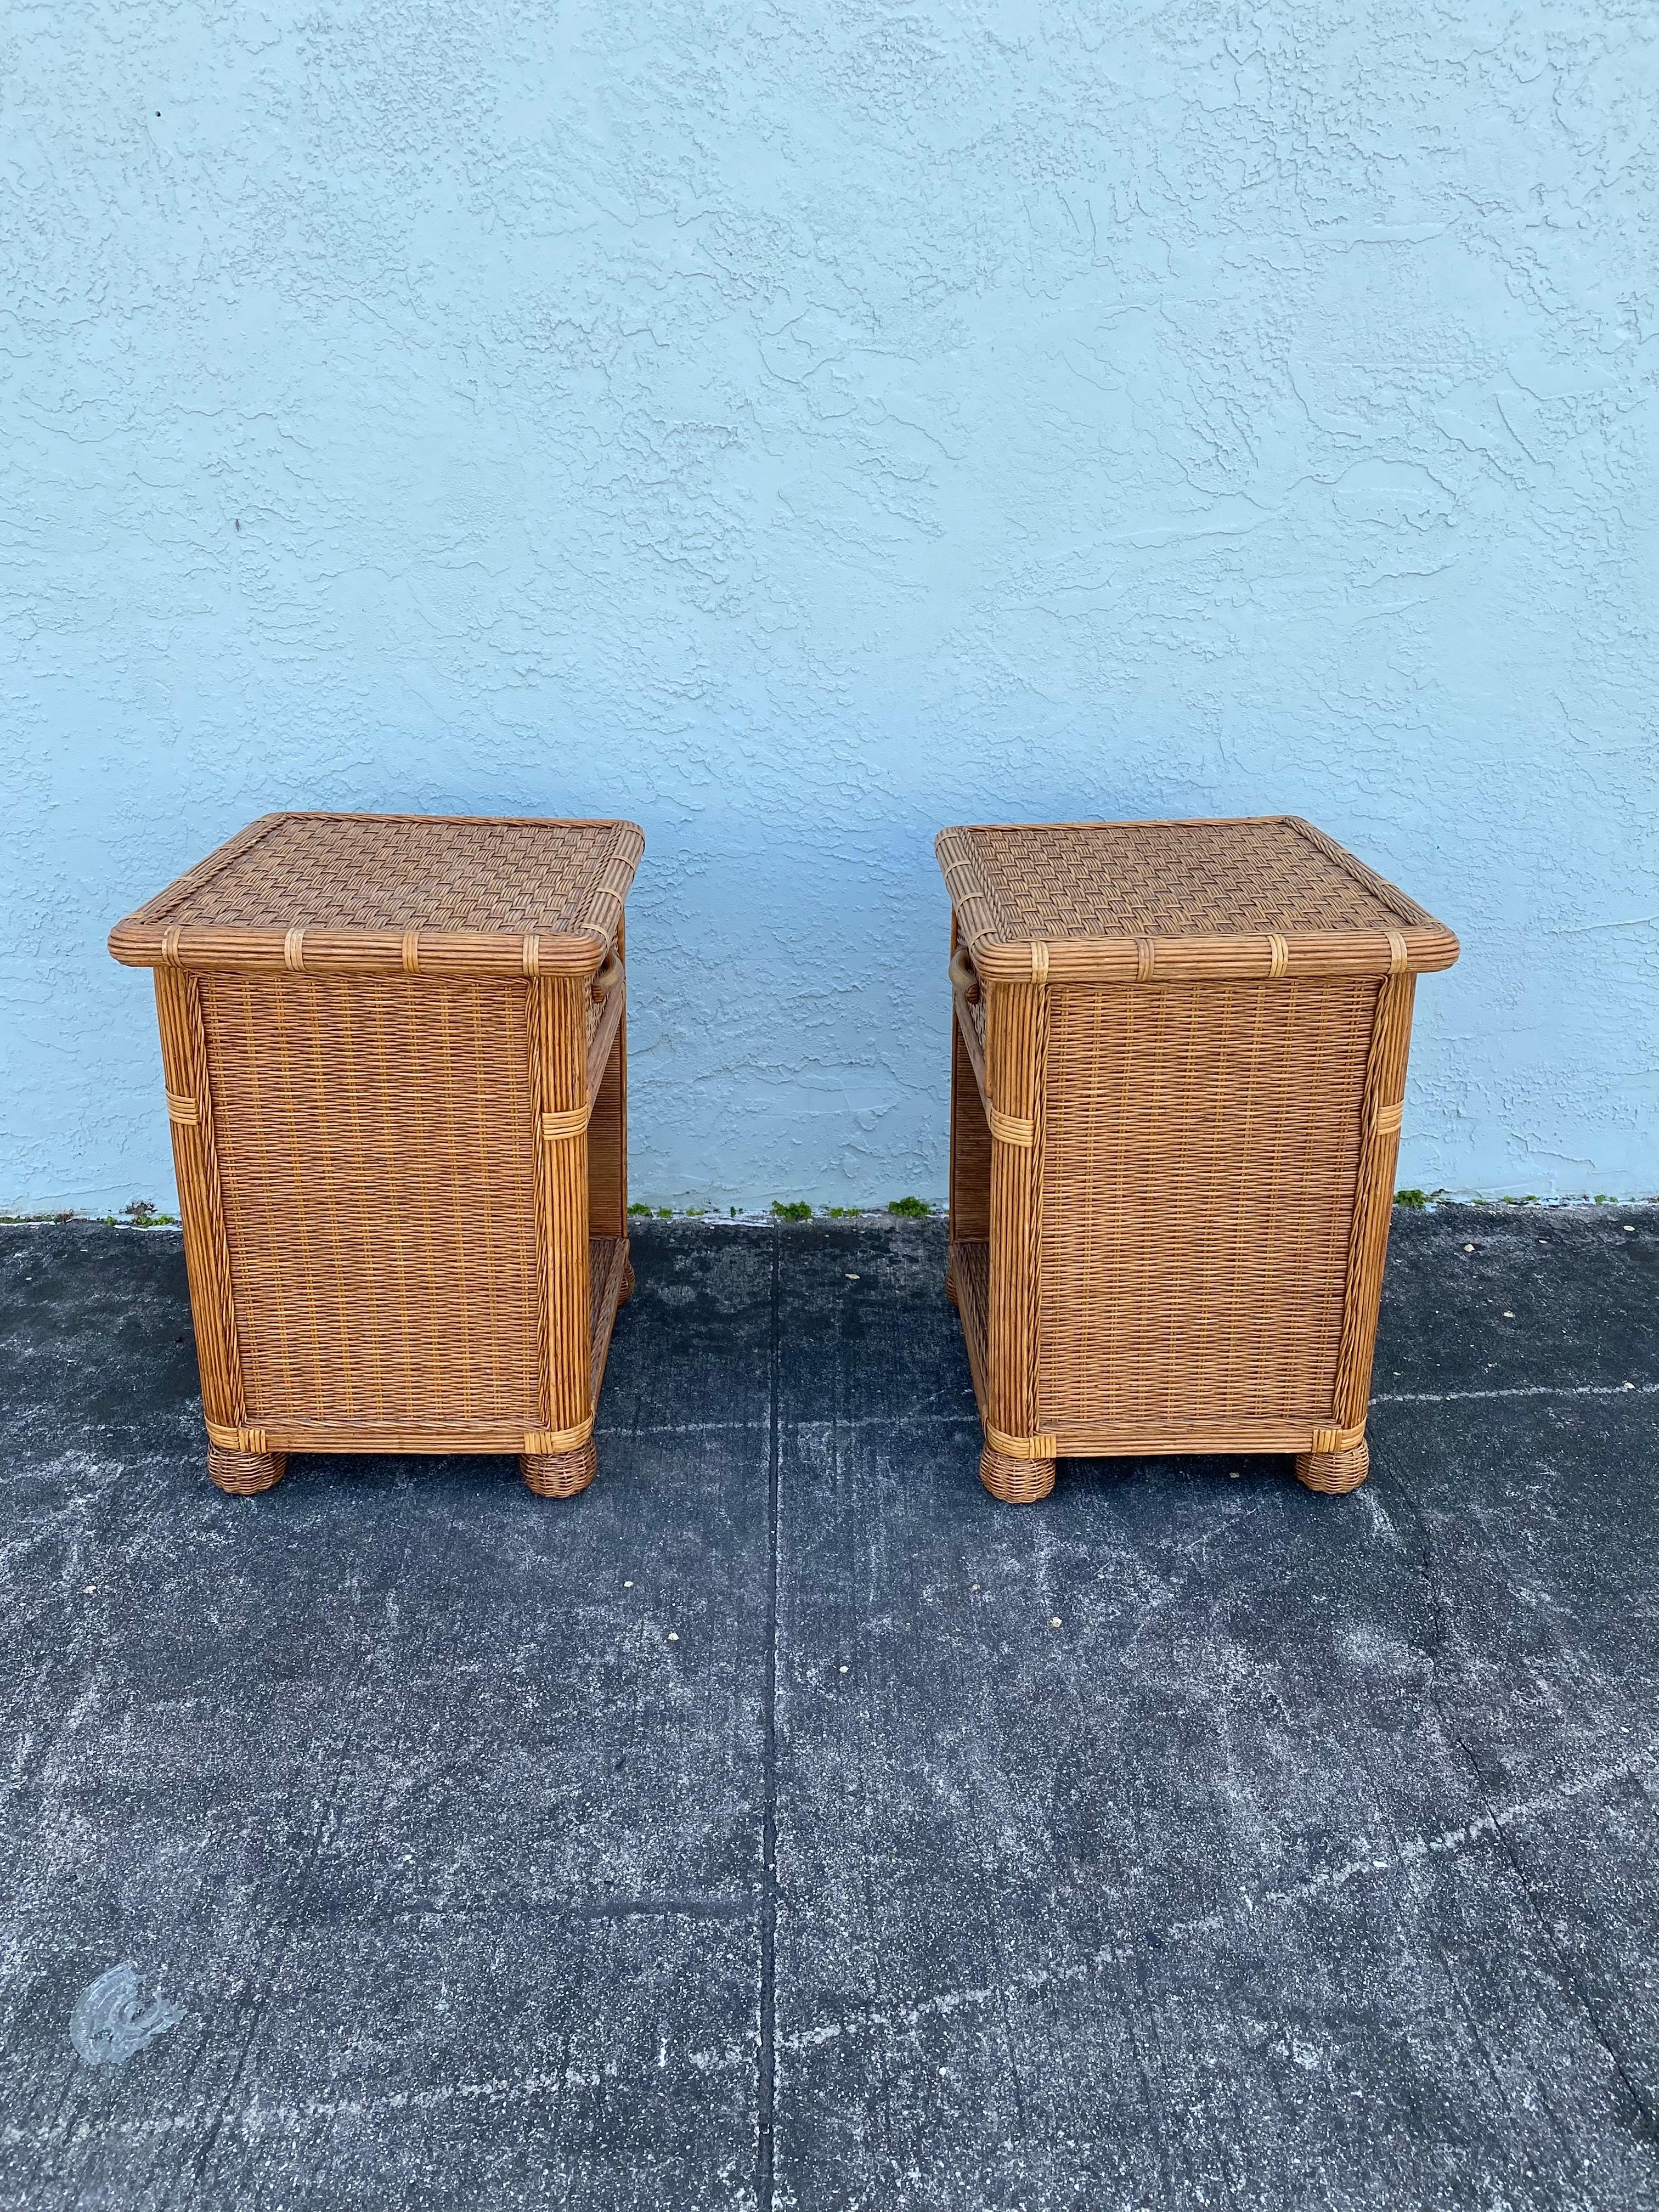 Bohemian 1970s Rattan Wicker End Tables Night Stands, Set of 2 For Sale